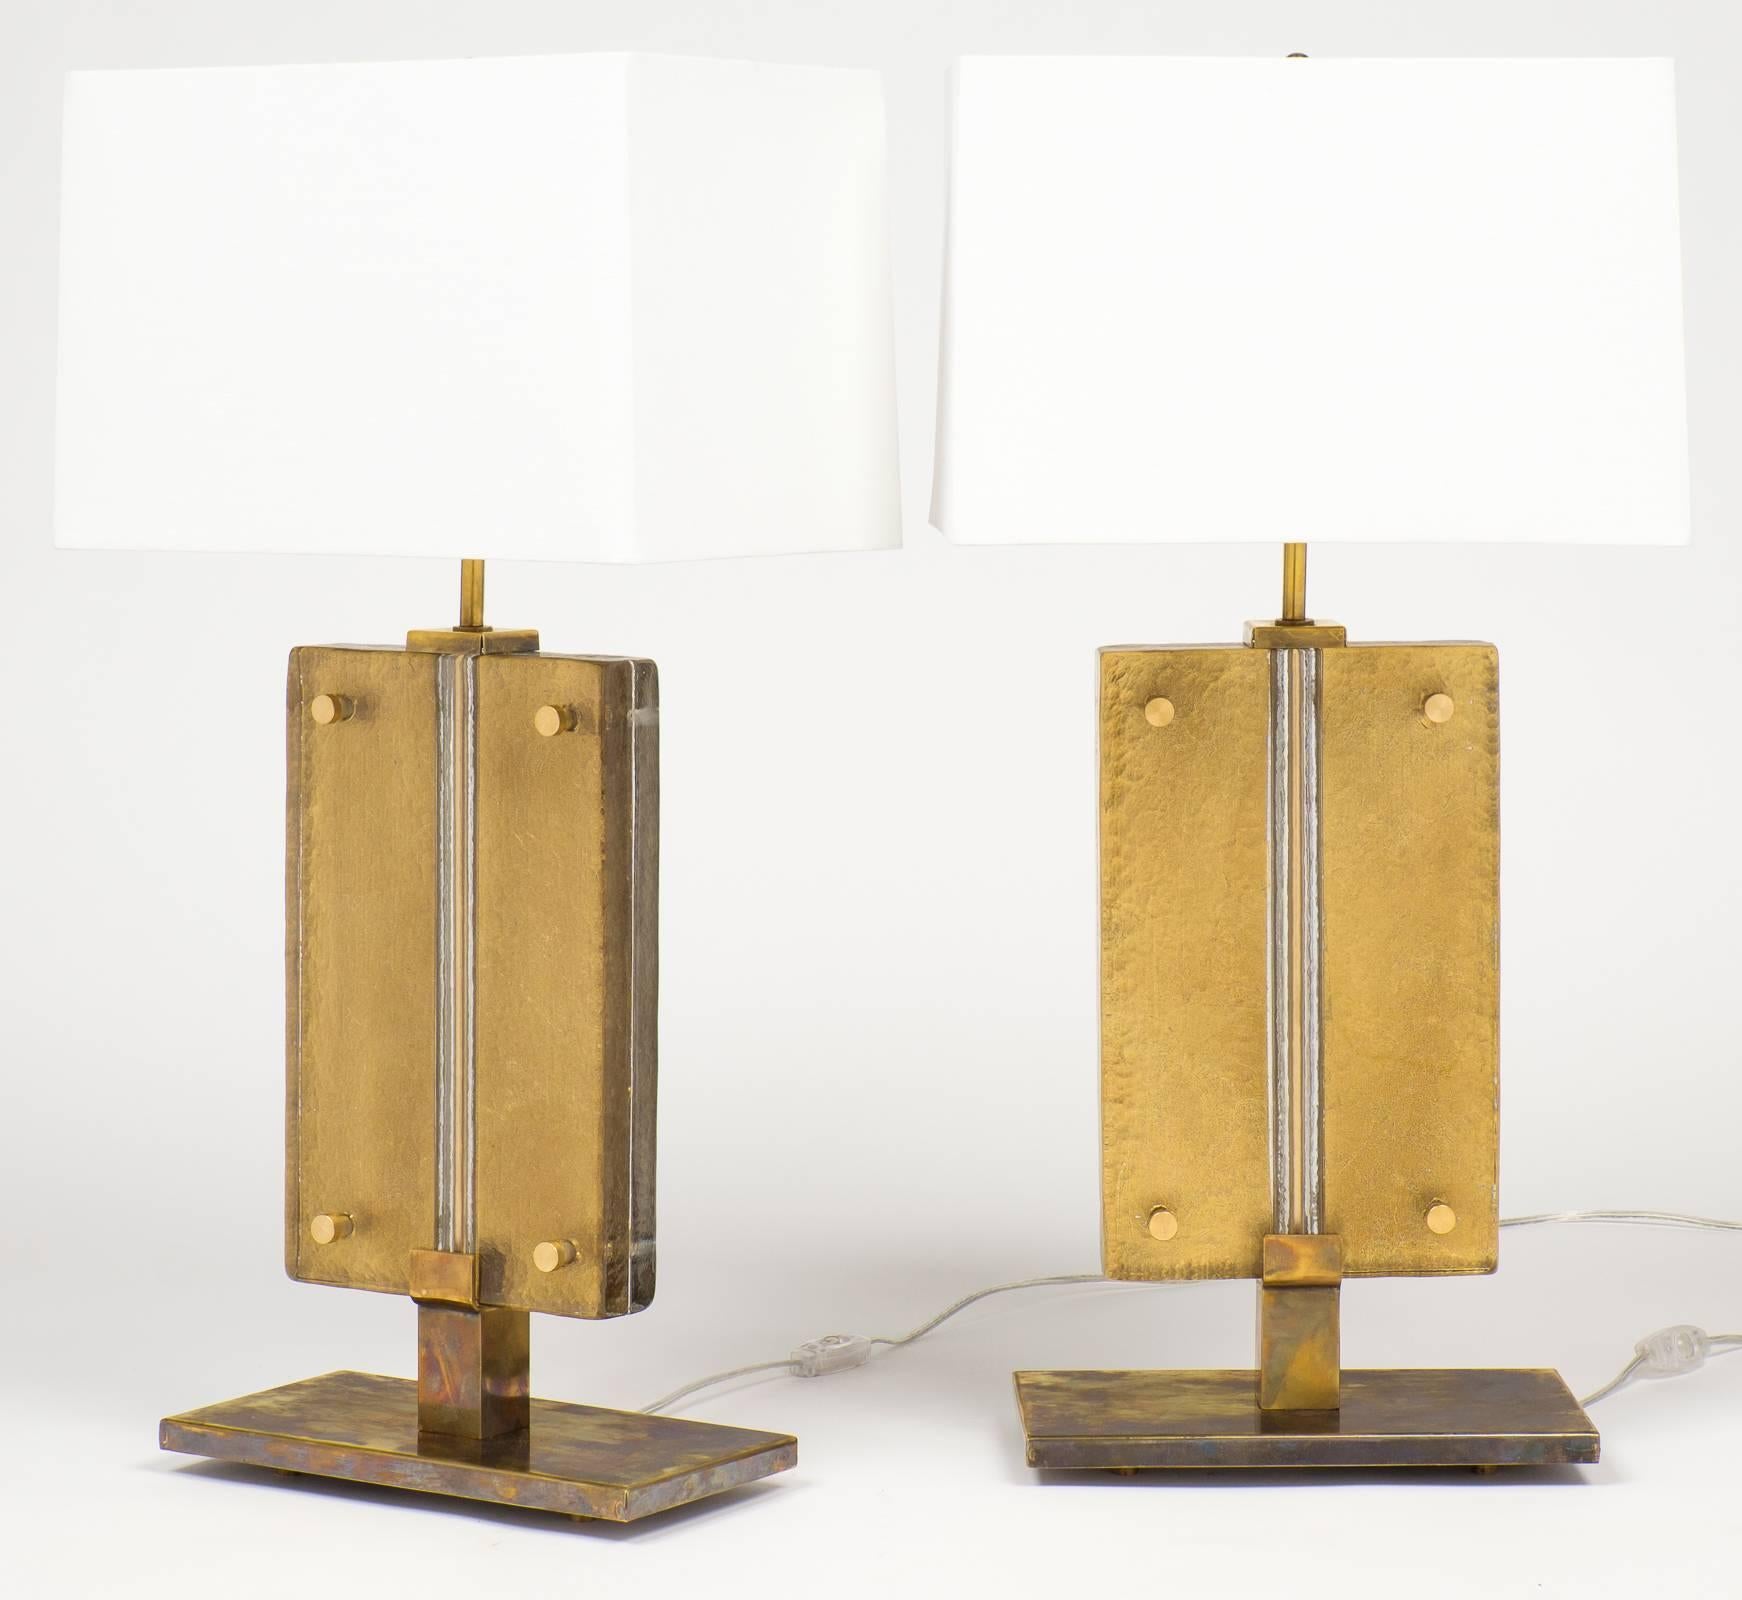 A stunning modern pair of Murano gold-leafed glass slab table lamps fused with 23-karat gold. At once Industrial and glam, this pair adds the perfect amount of grounding and structure to any interior environment.

This pair is currently located at